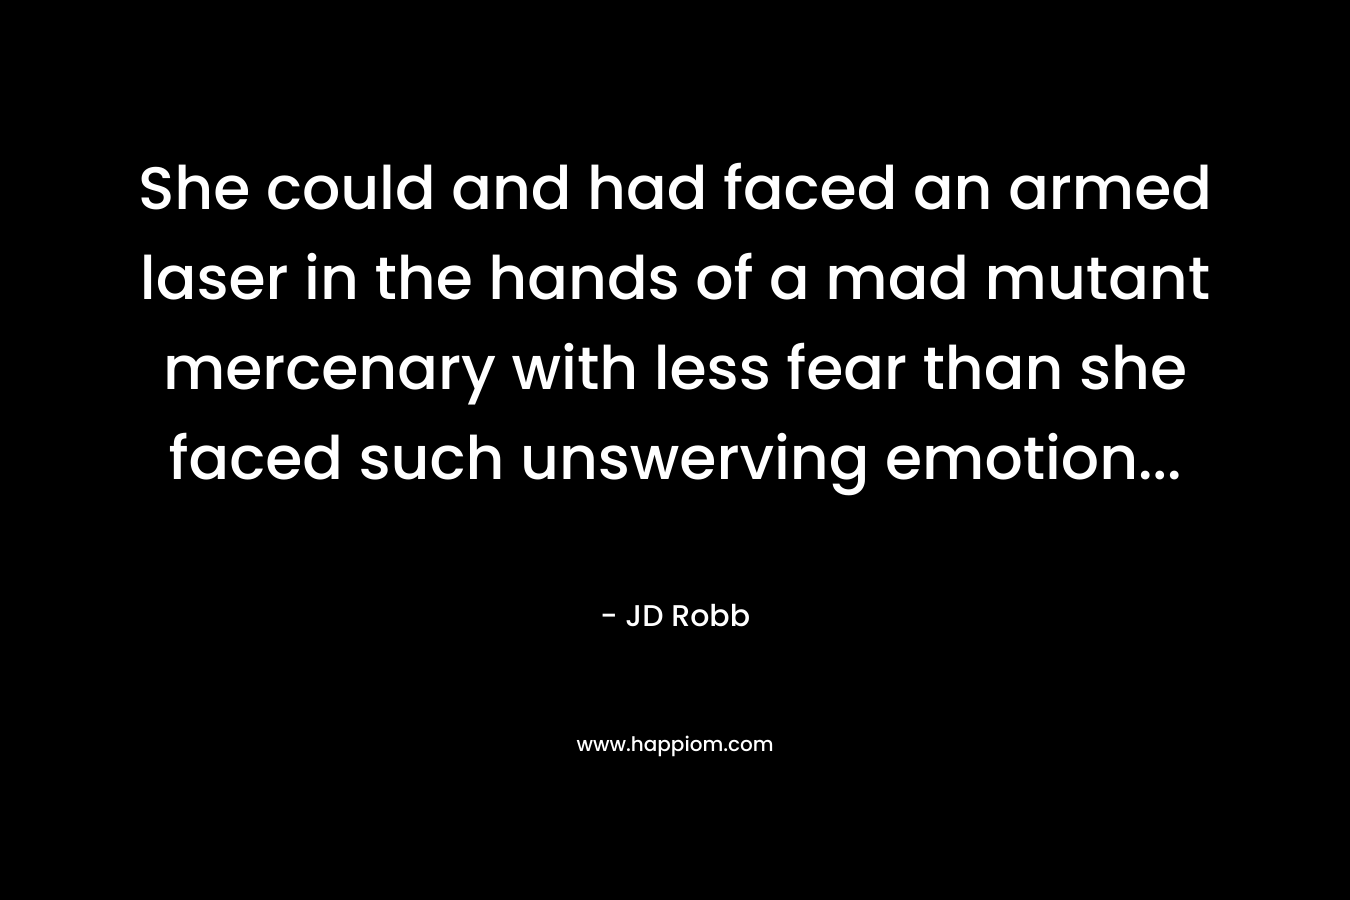 She could and had faced an armed laser in the hands of a mad mutant mercenary with less fear than she faced such unswerving emotion… – JD Robb